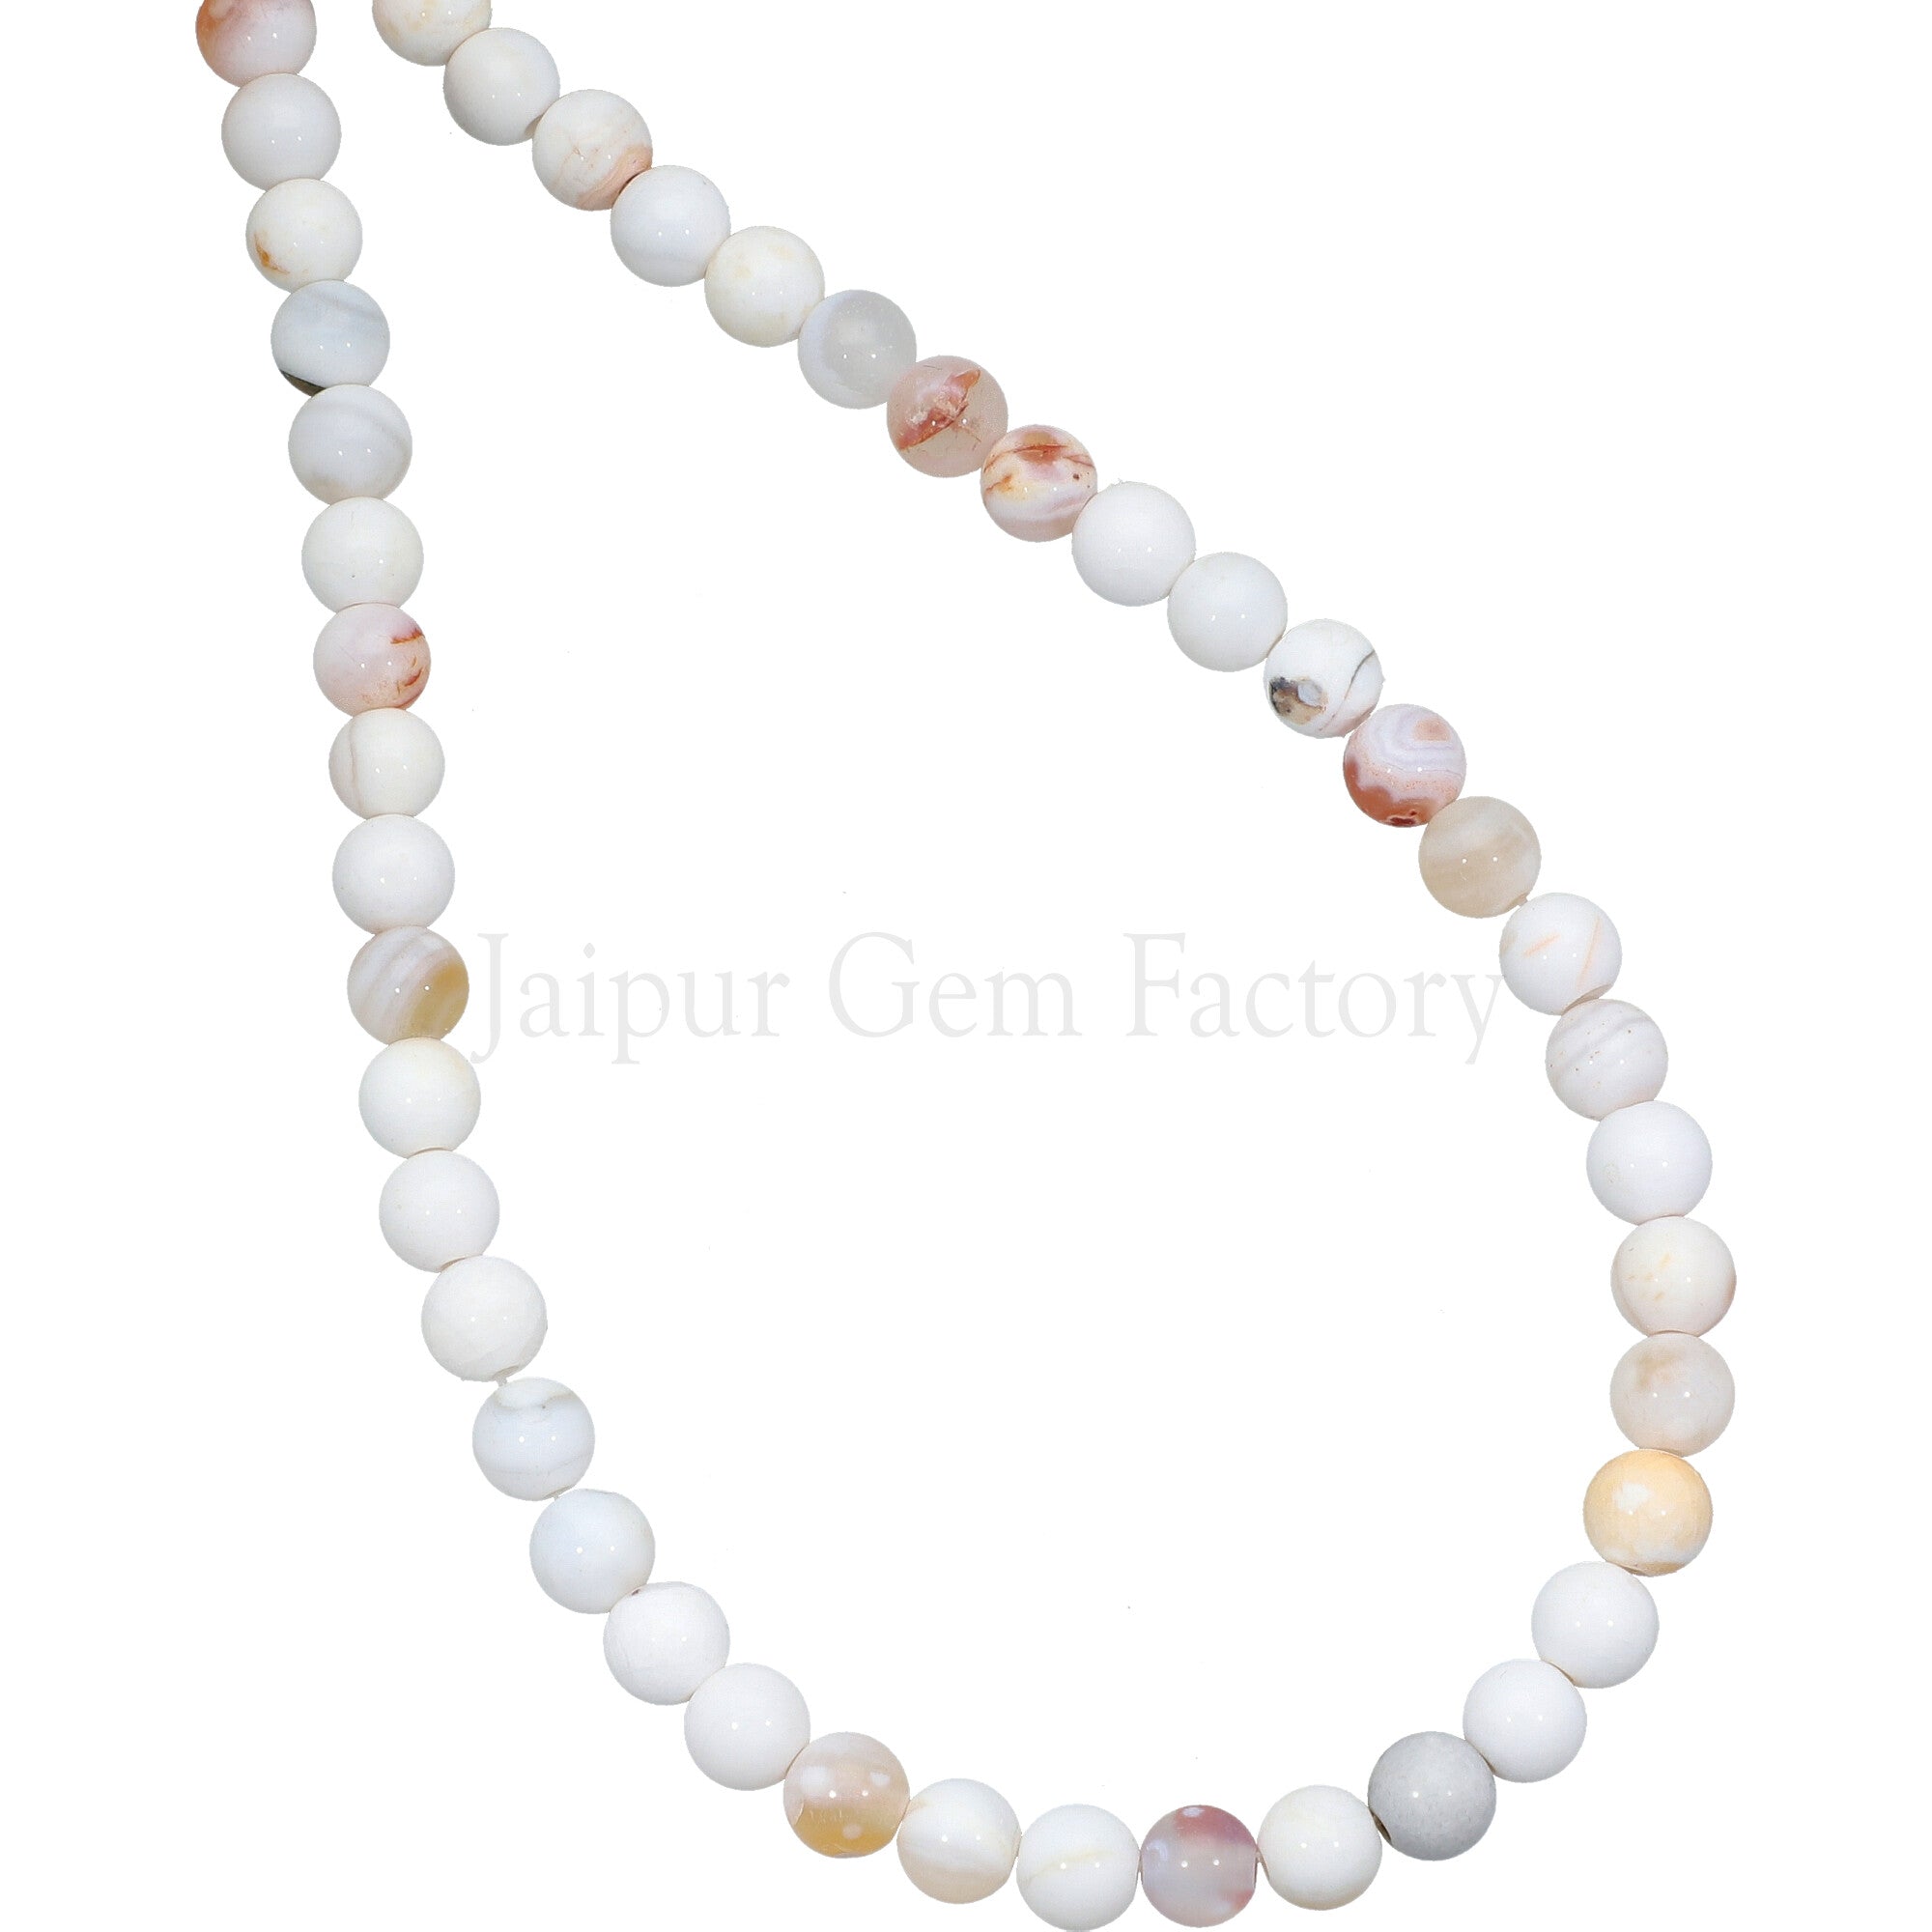 6 MM White Lace Agate Smooth Round Beads 15 Inches Strand